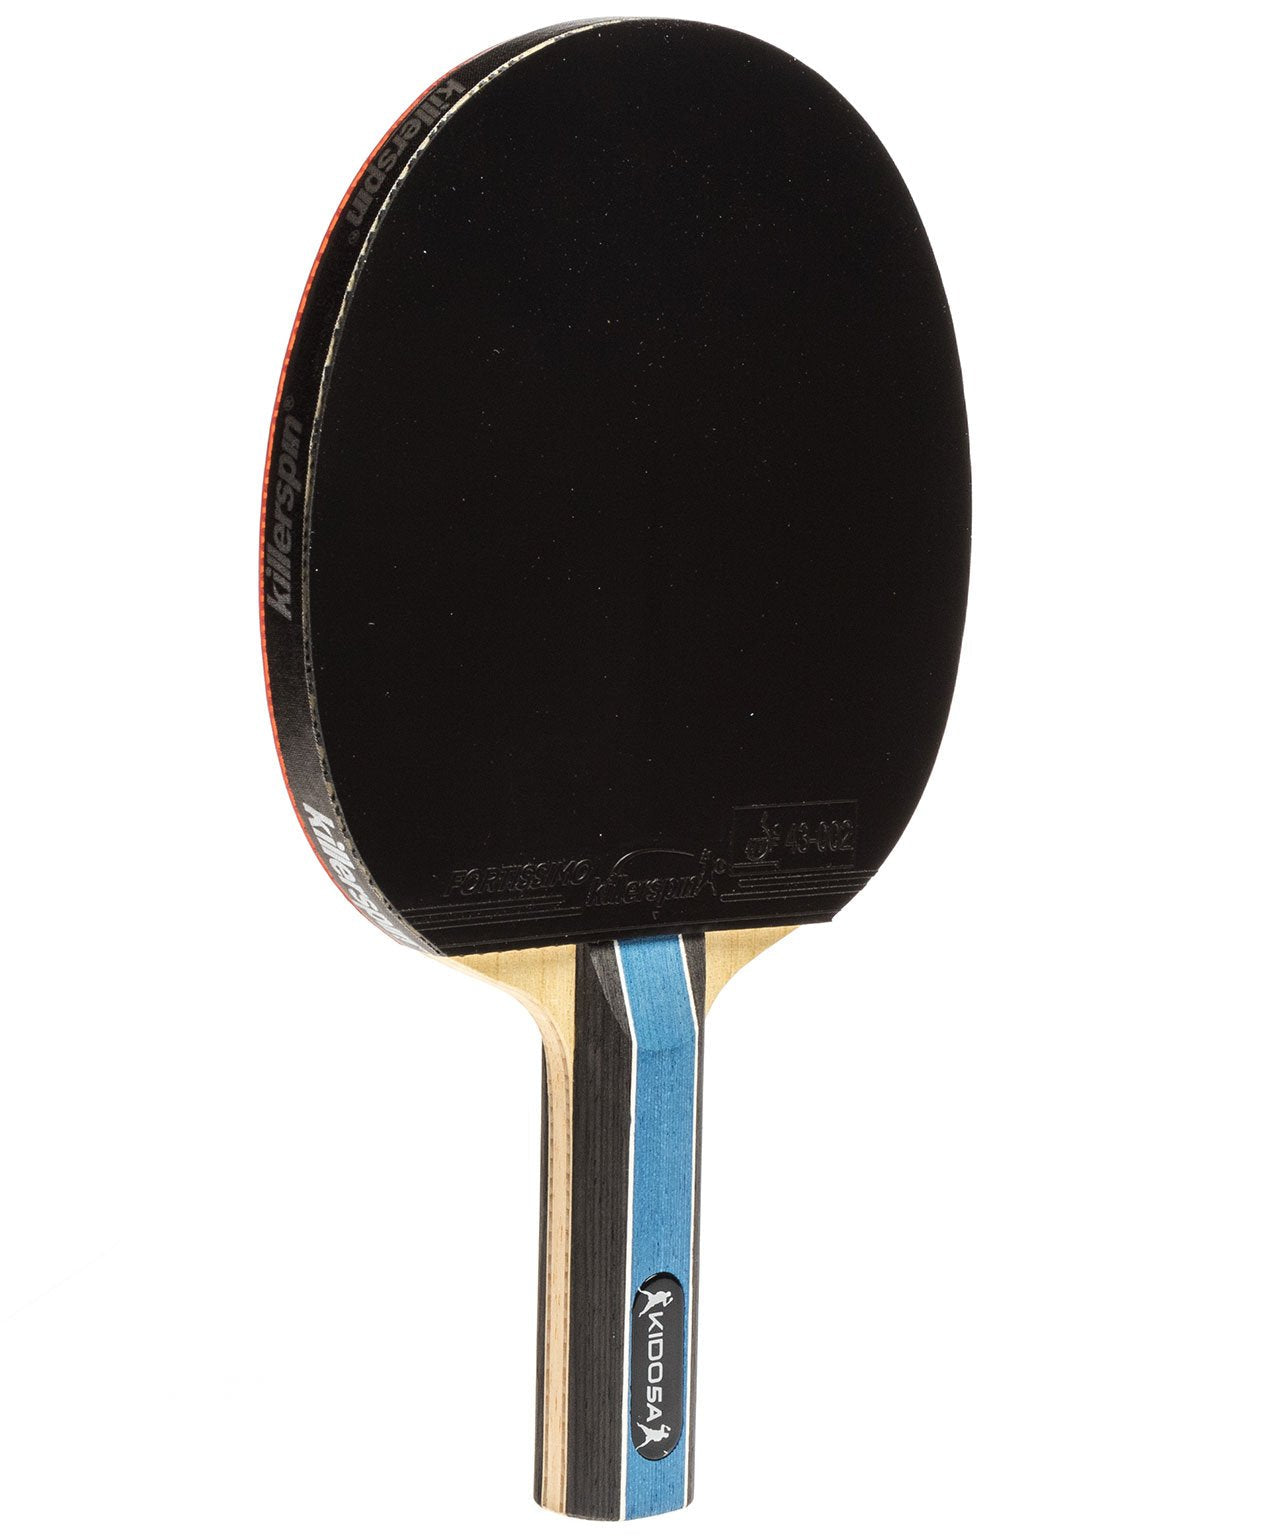 Killerspin Ping Pong Paddle Kido 5A RTG Premium - Straight Black Fortissimo Rubber